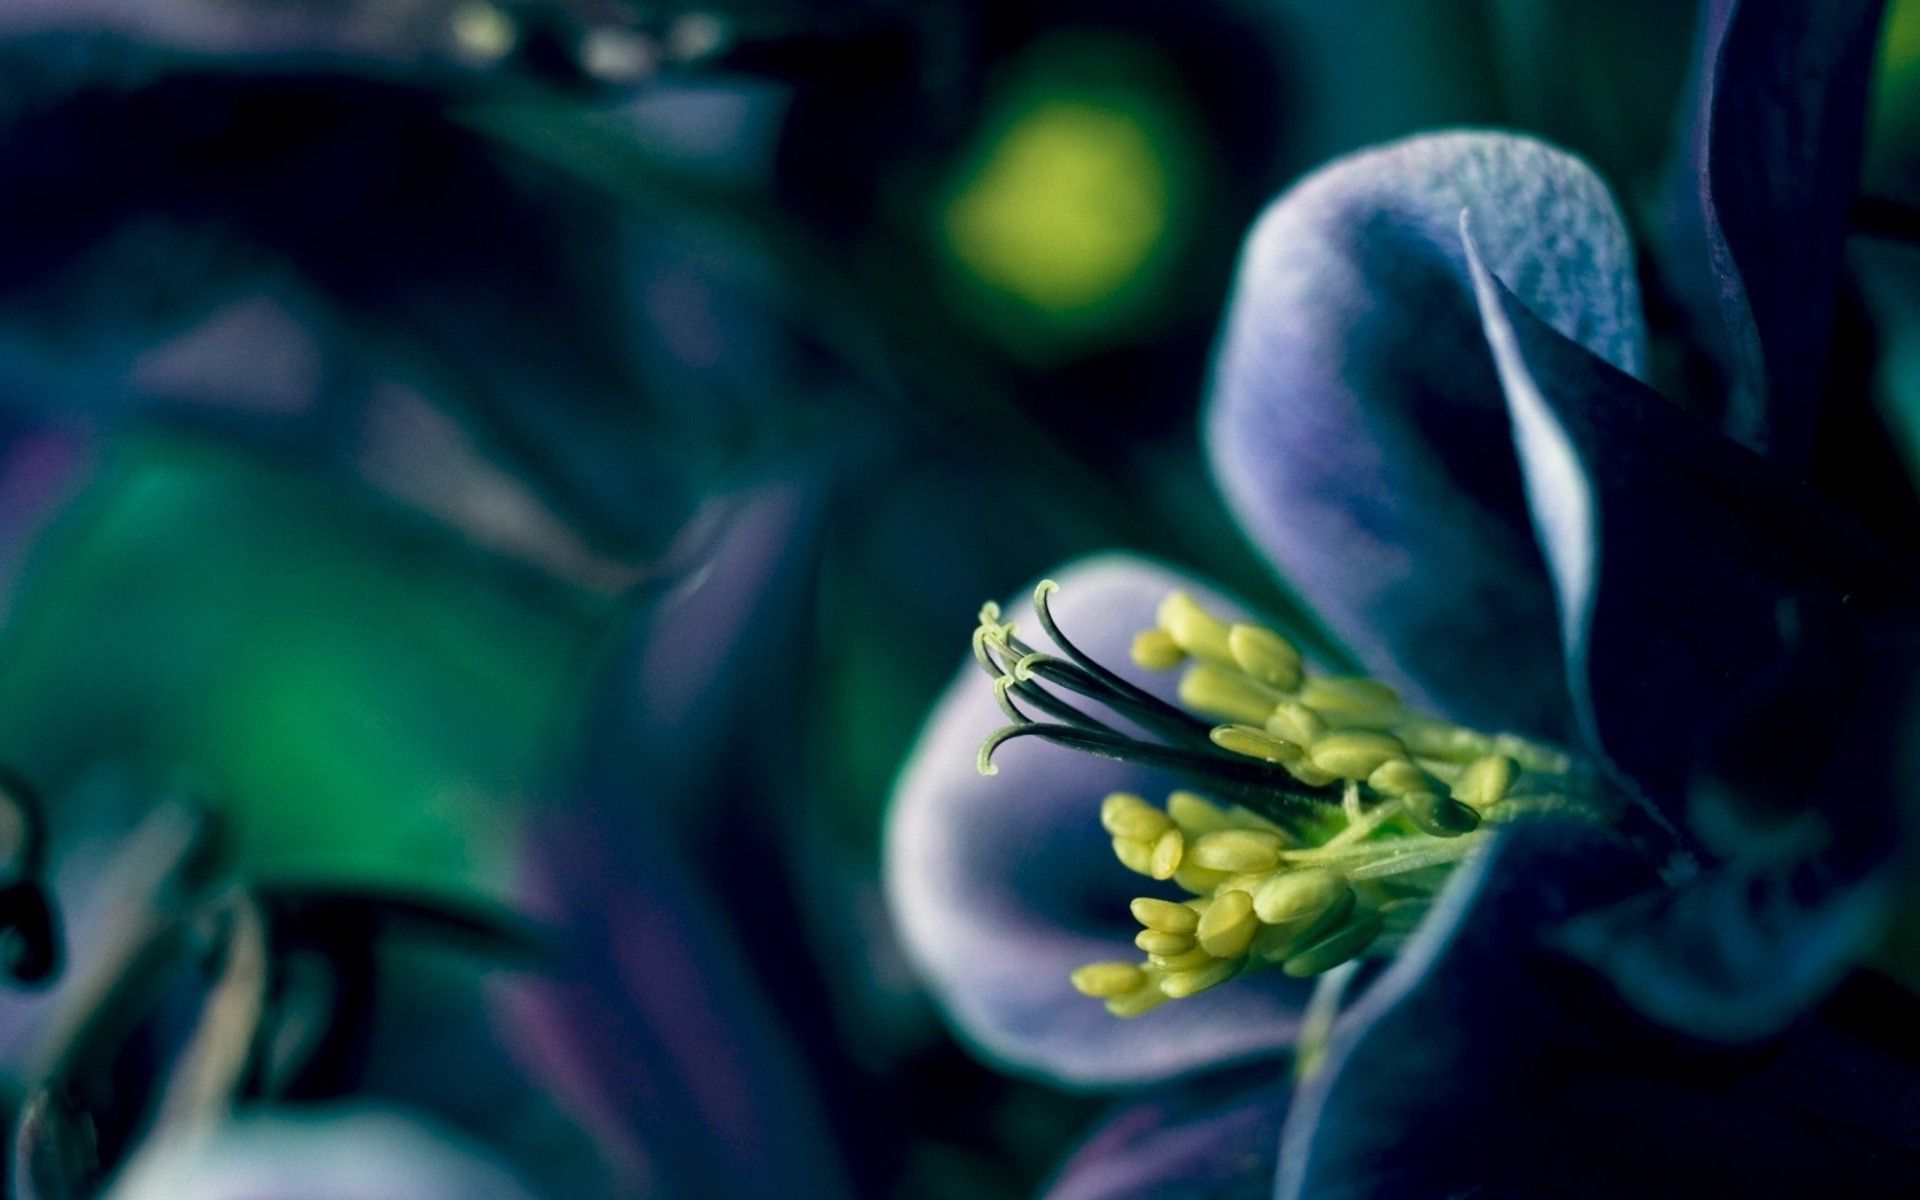 Wallpaper, nature, green, yellow, blue flowers, color, leaf, flower, flora, hand, darkness, petal, 1920x1200 px, computer wallpaper, land plant, flowering plant, close up, macro photography 1920x1200